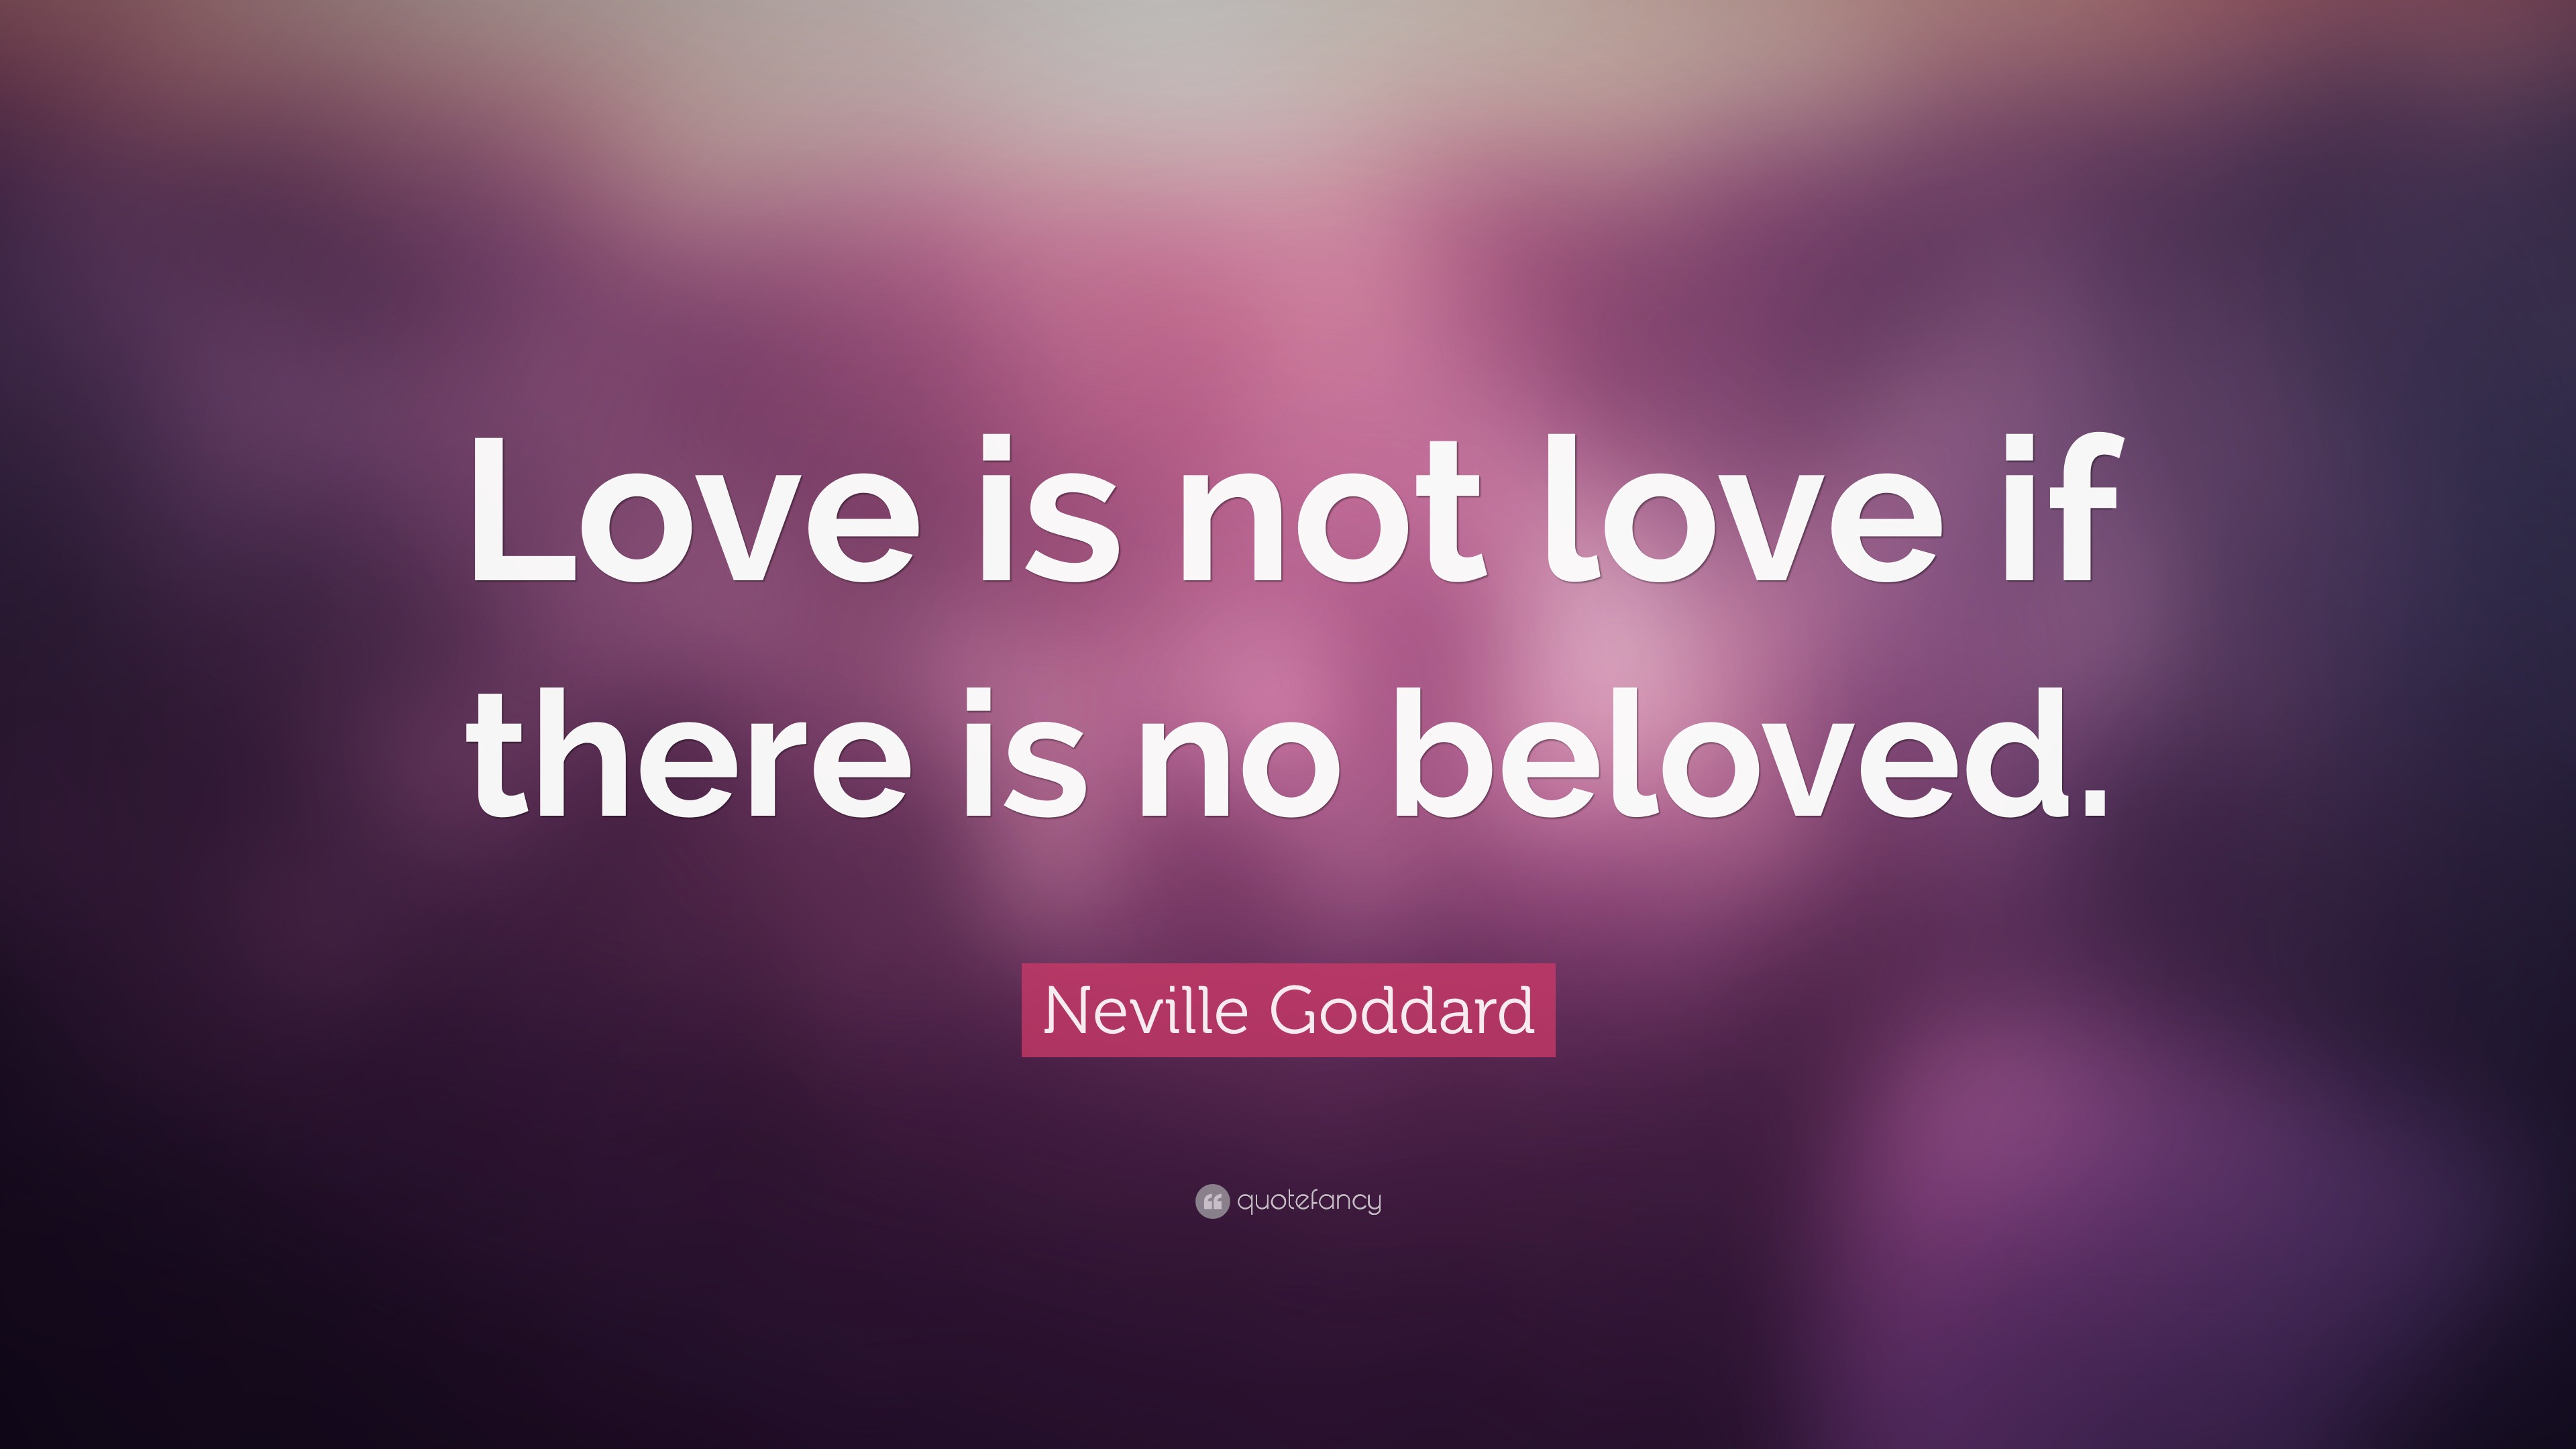 Neville Goddard Quotes (74 wallpapers) - Quotefancy